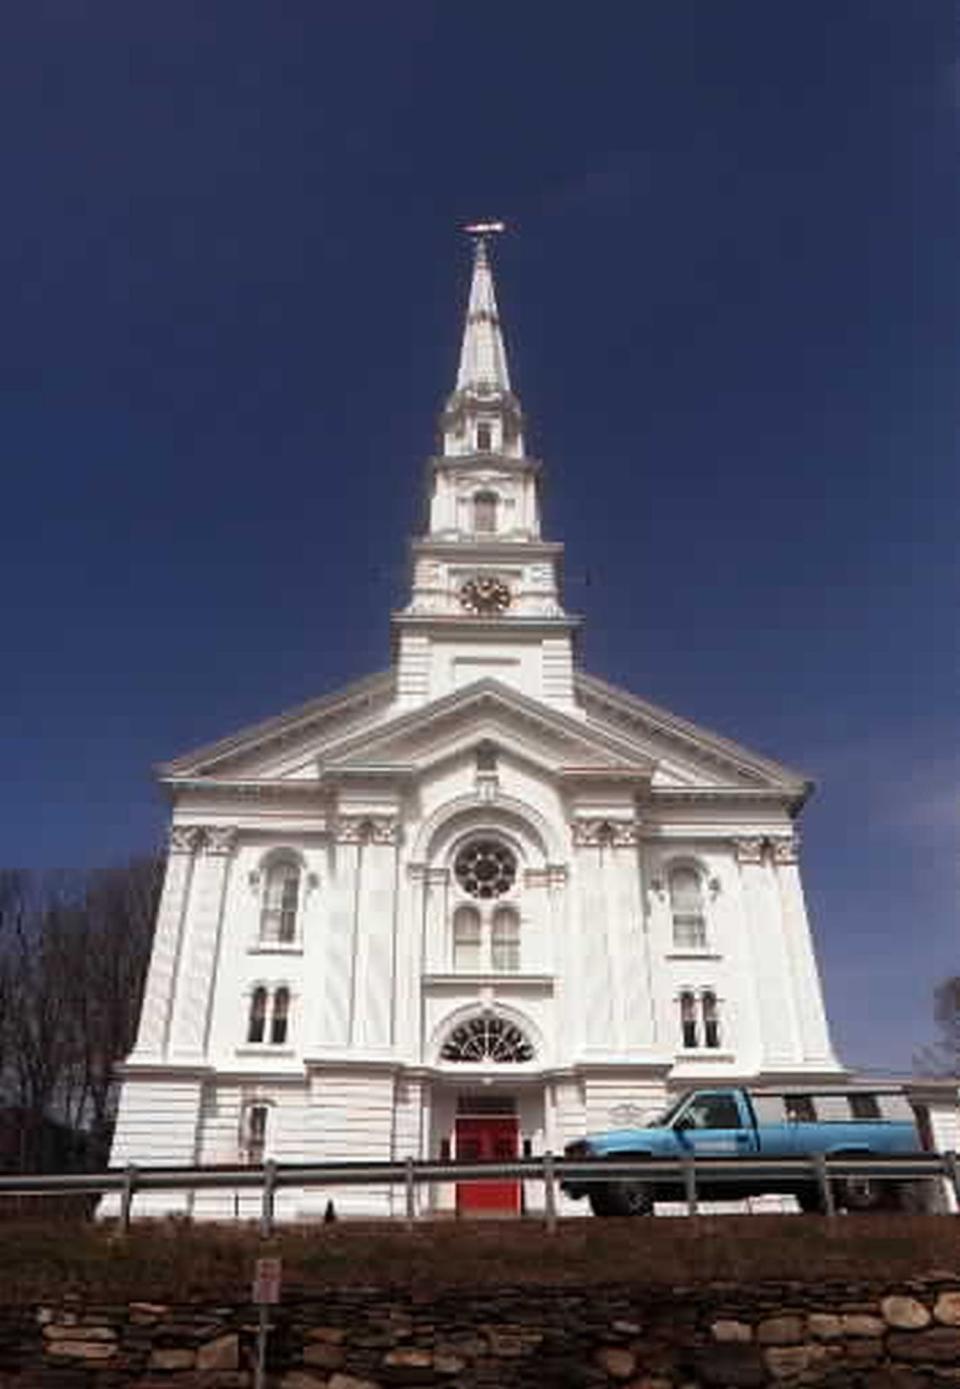 The First Congregational Church in 2000